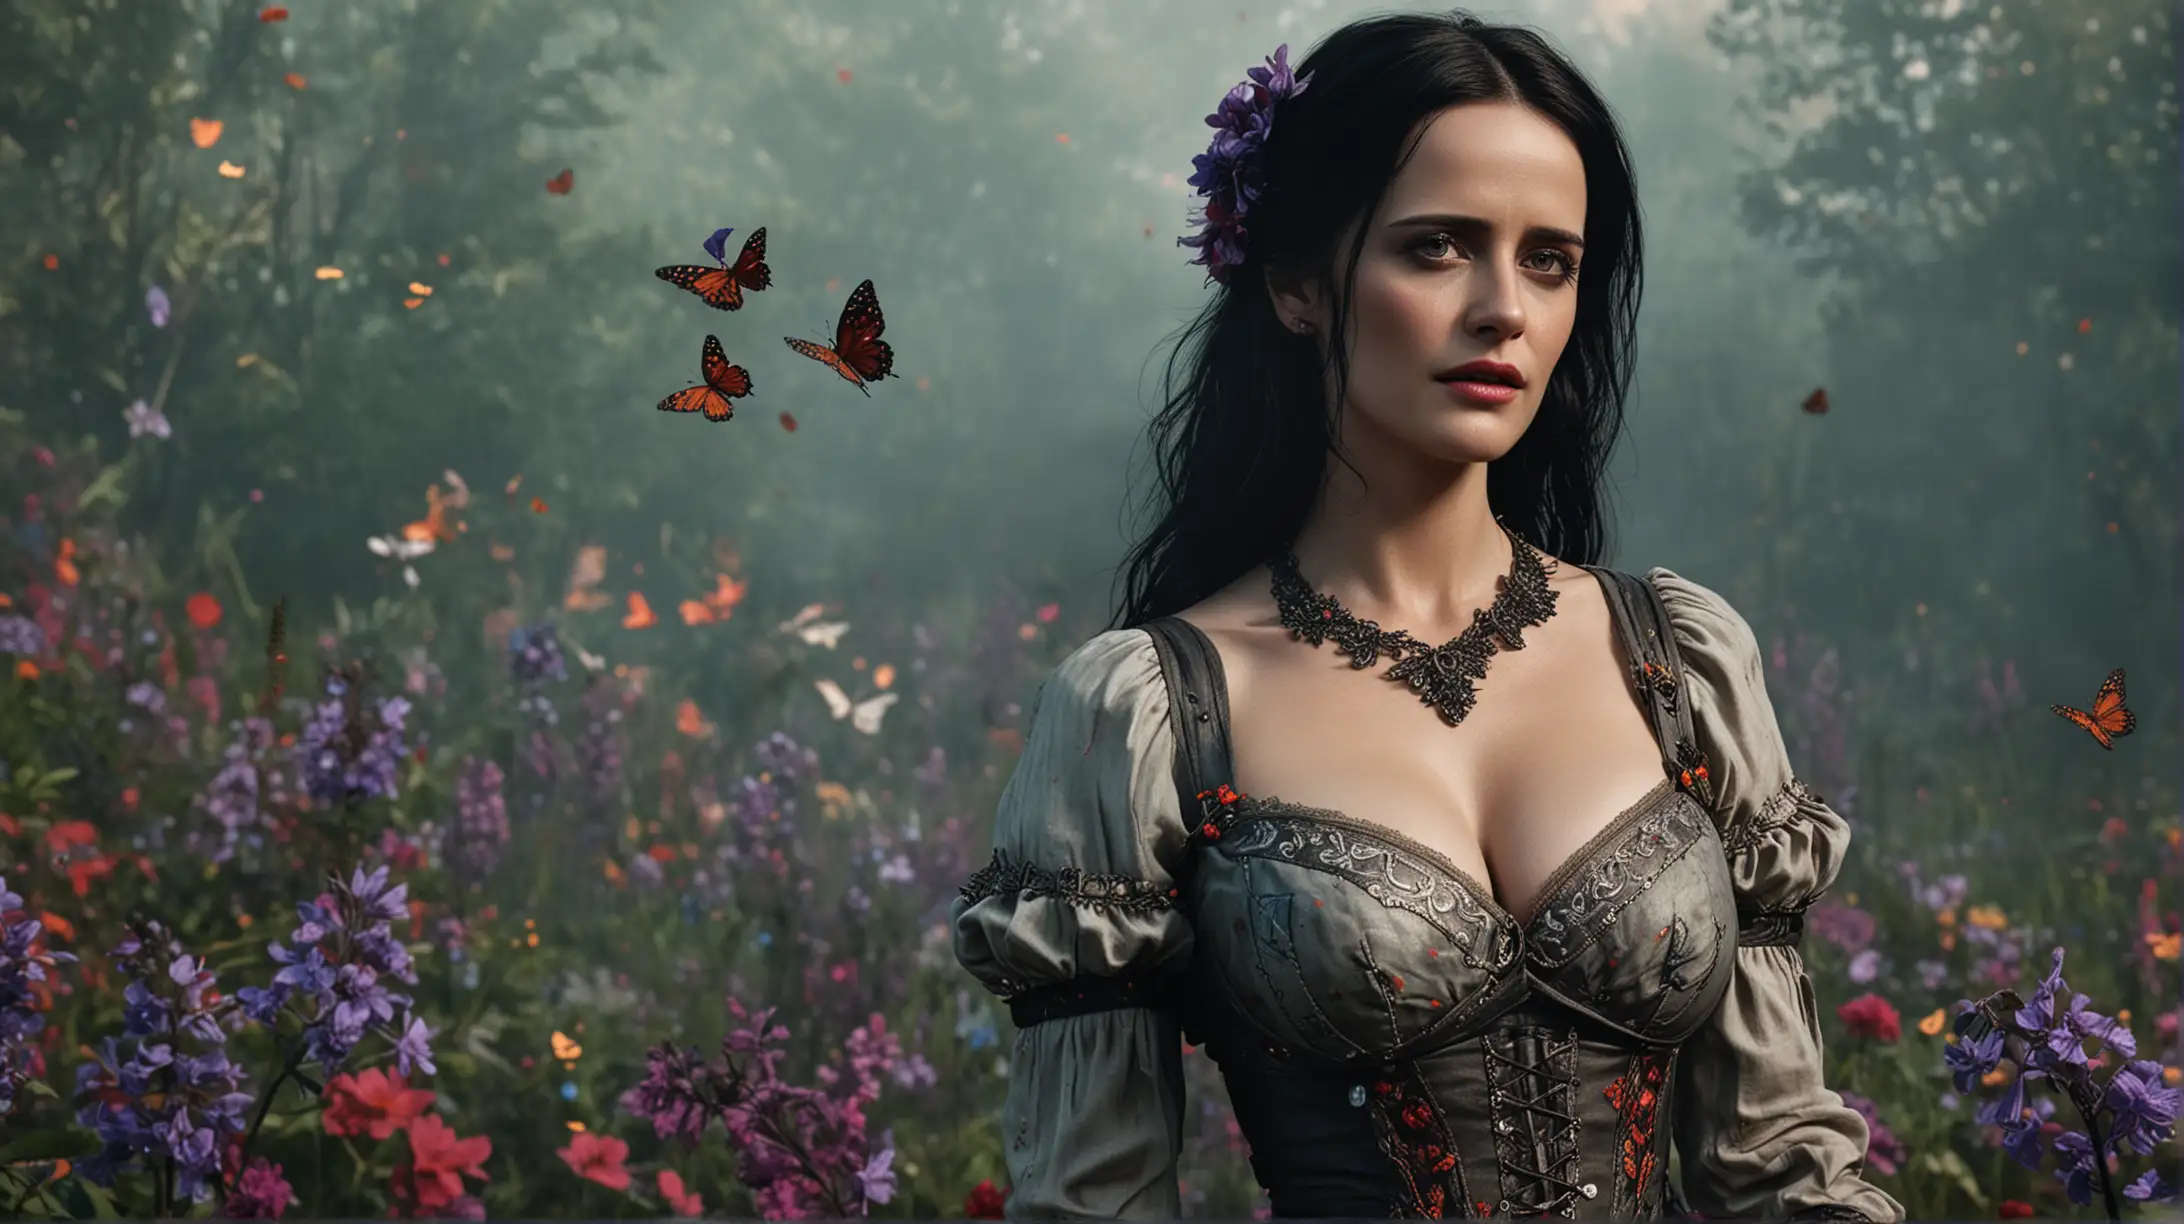 Eva Green in The Witcher Game Enchanting Witch Amidst Colorful Flowers and Magic